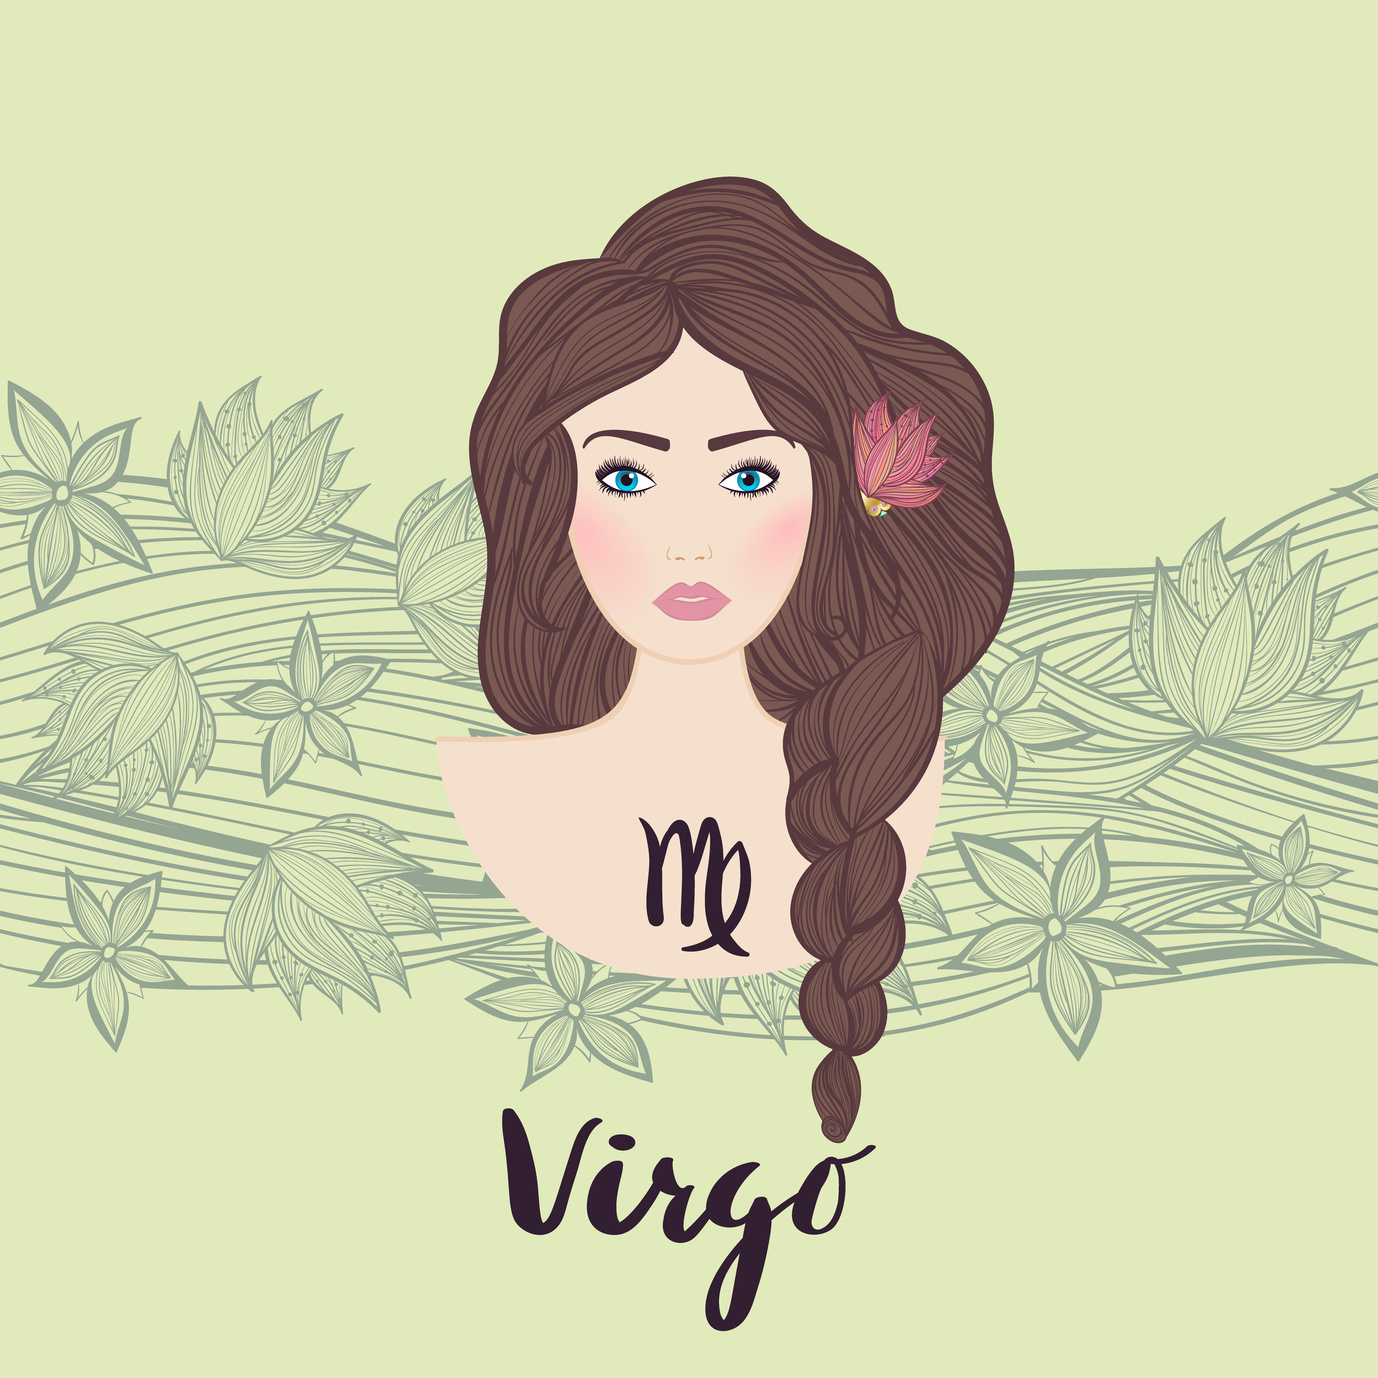 Illustration of Virgo astrological sign as a beautiful girl